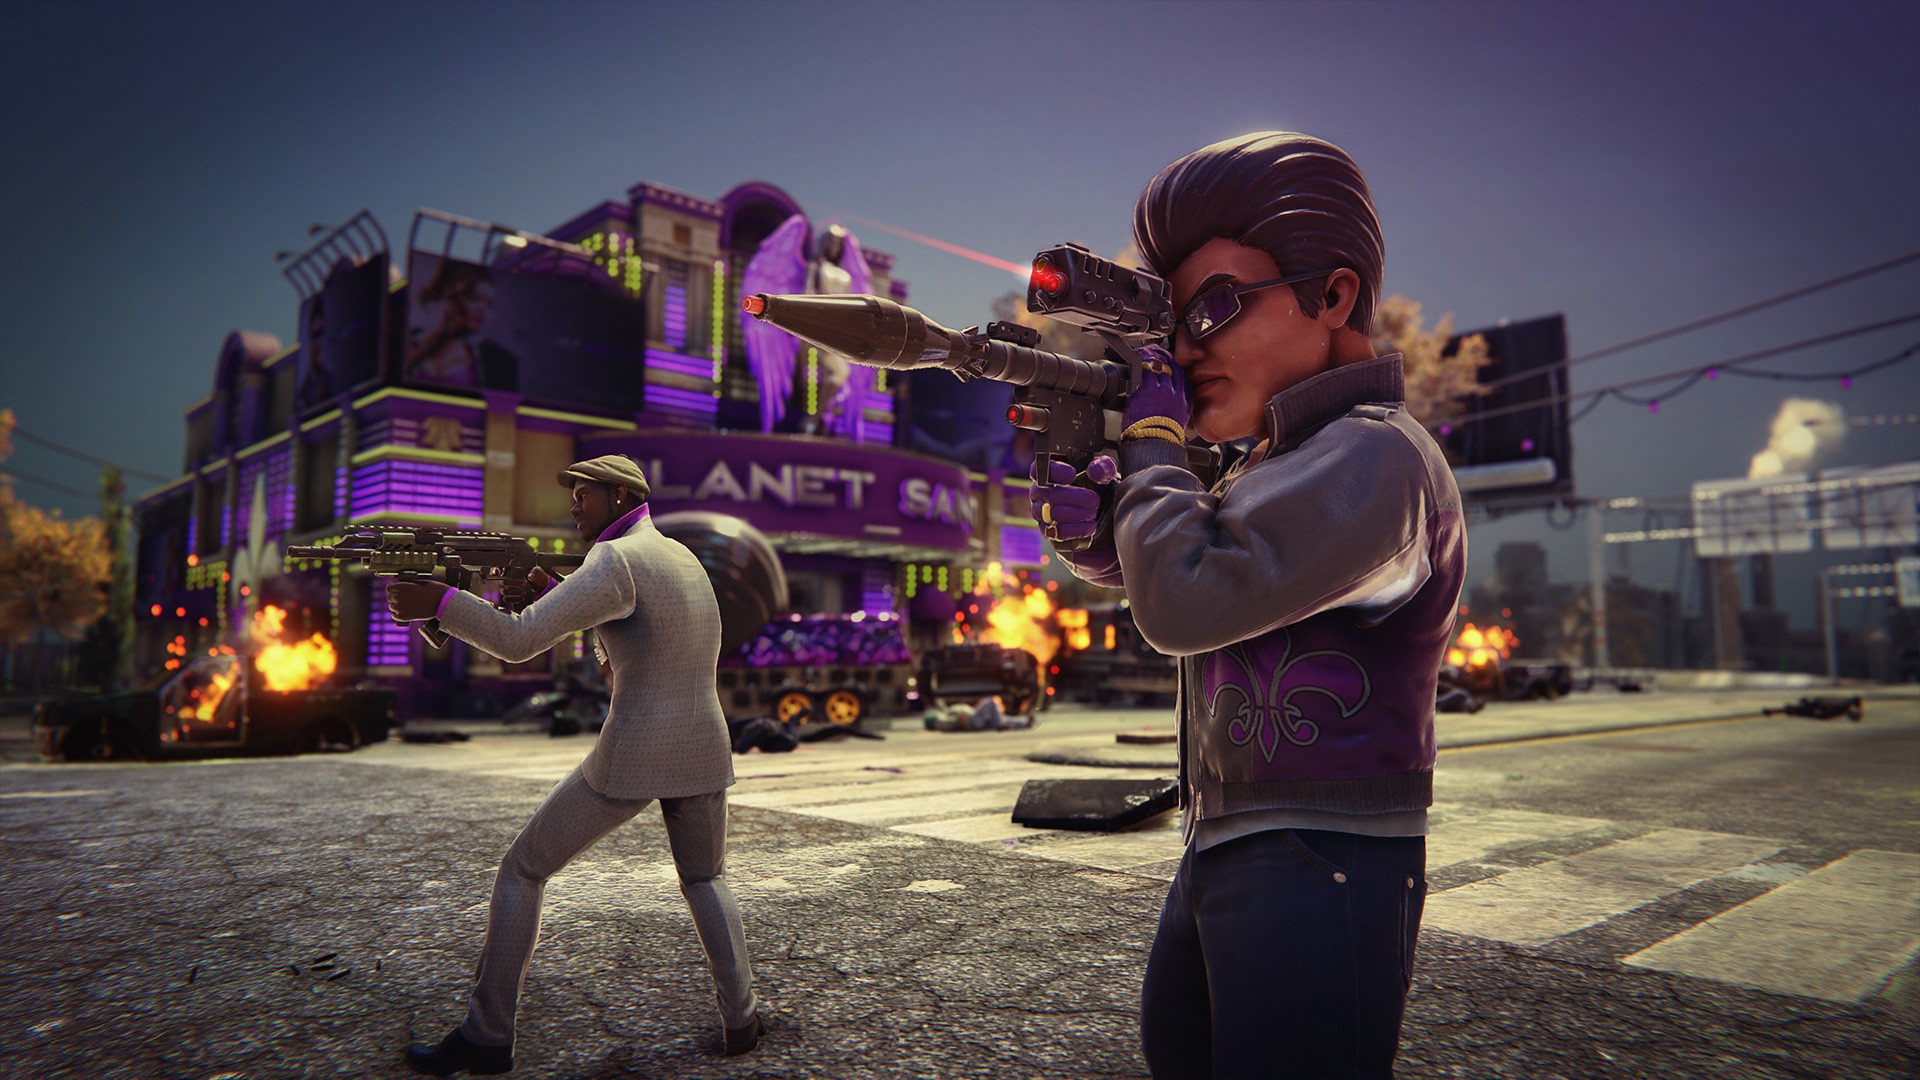 Saints Row: The Third Remastered is available for free